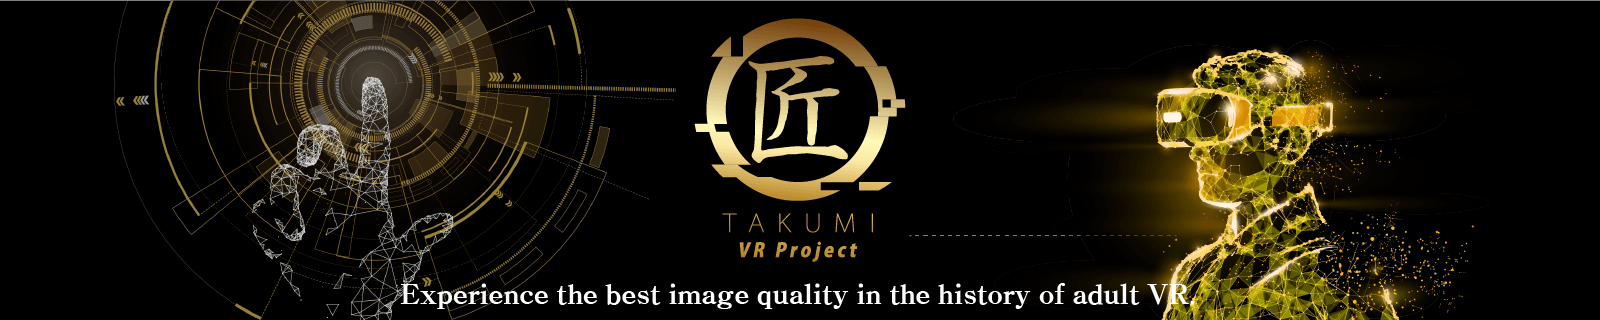 Takumi Series - The best image quality project in the history of adult VR